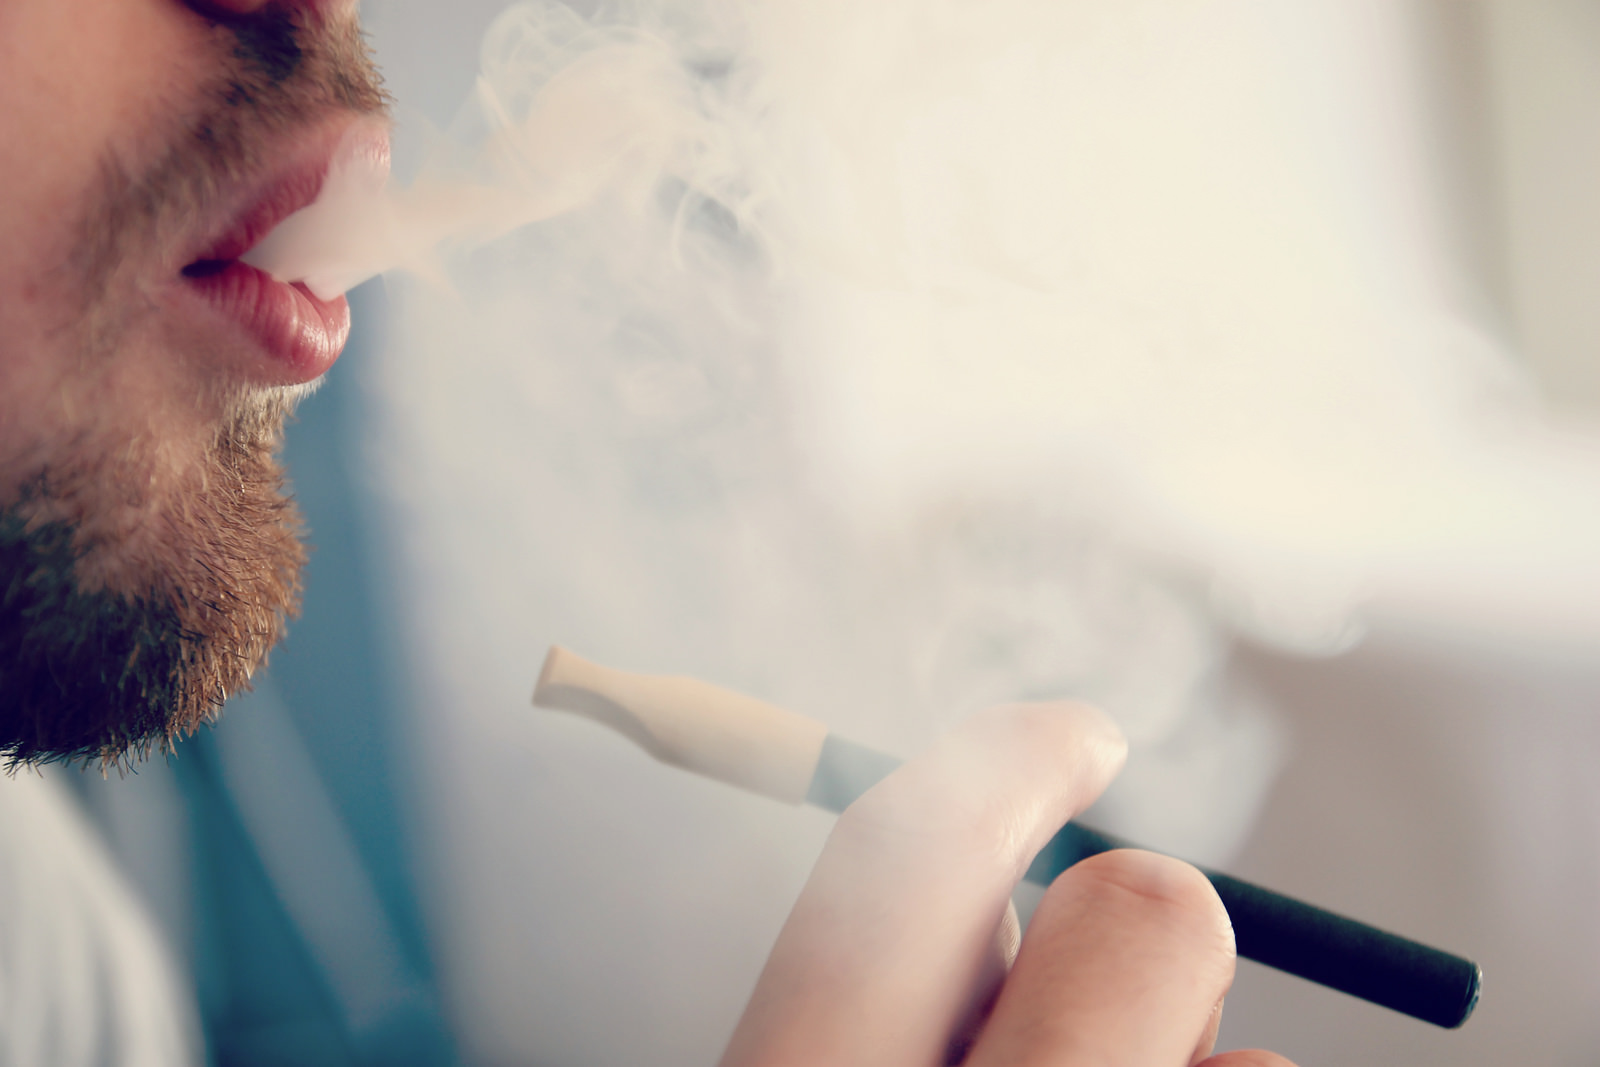 Vaping is Linked to Dangerous Chemicals as Confirmed by Harvard Study